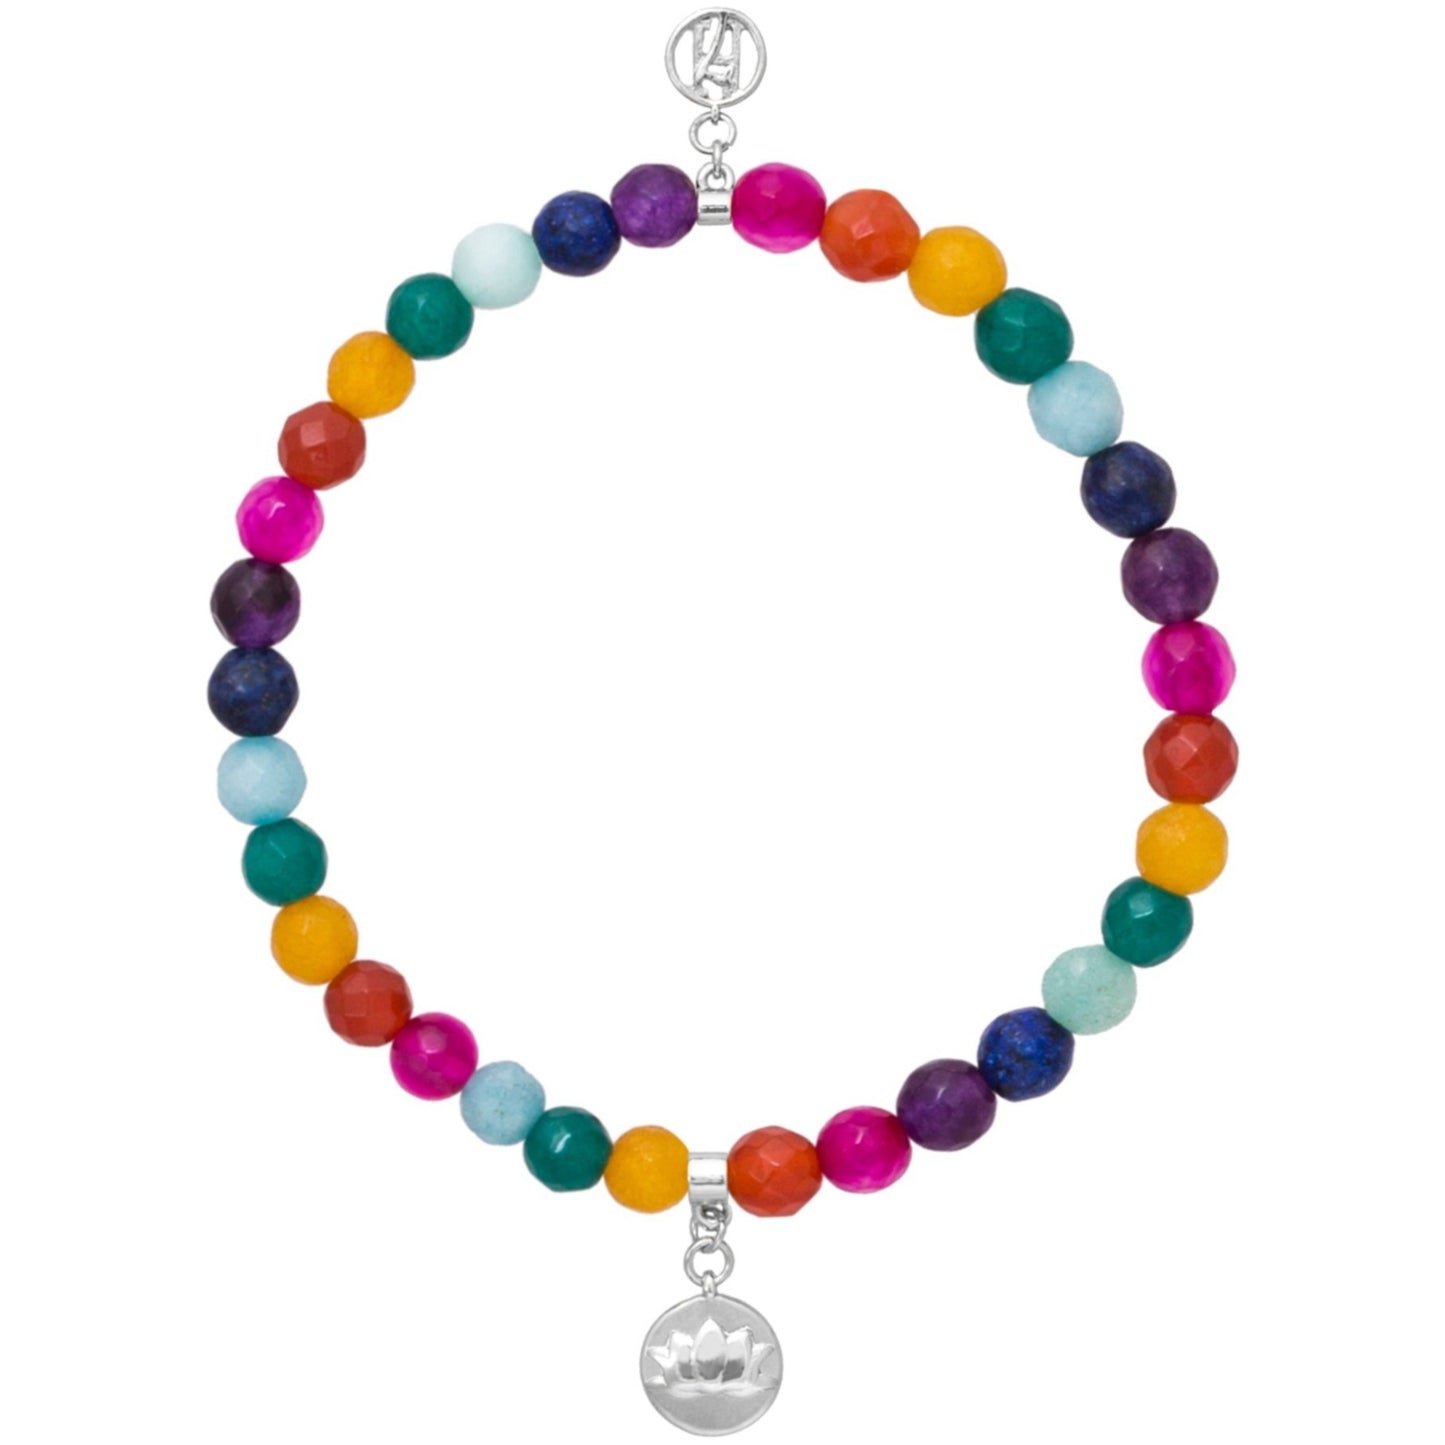 New Chakra Bracelet Representing Energy, Connections and Harmony